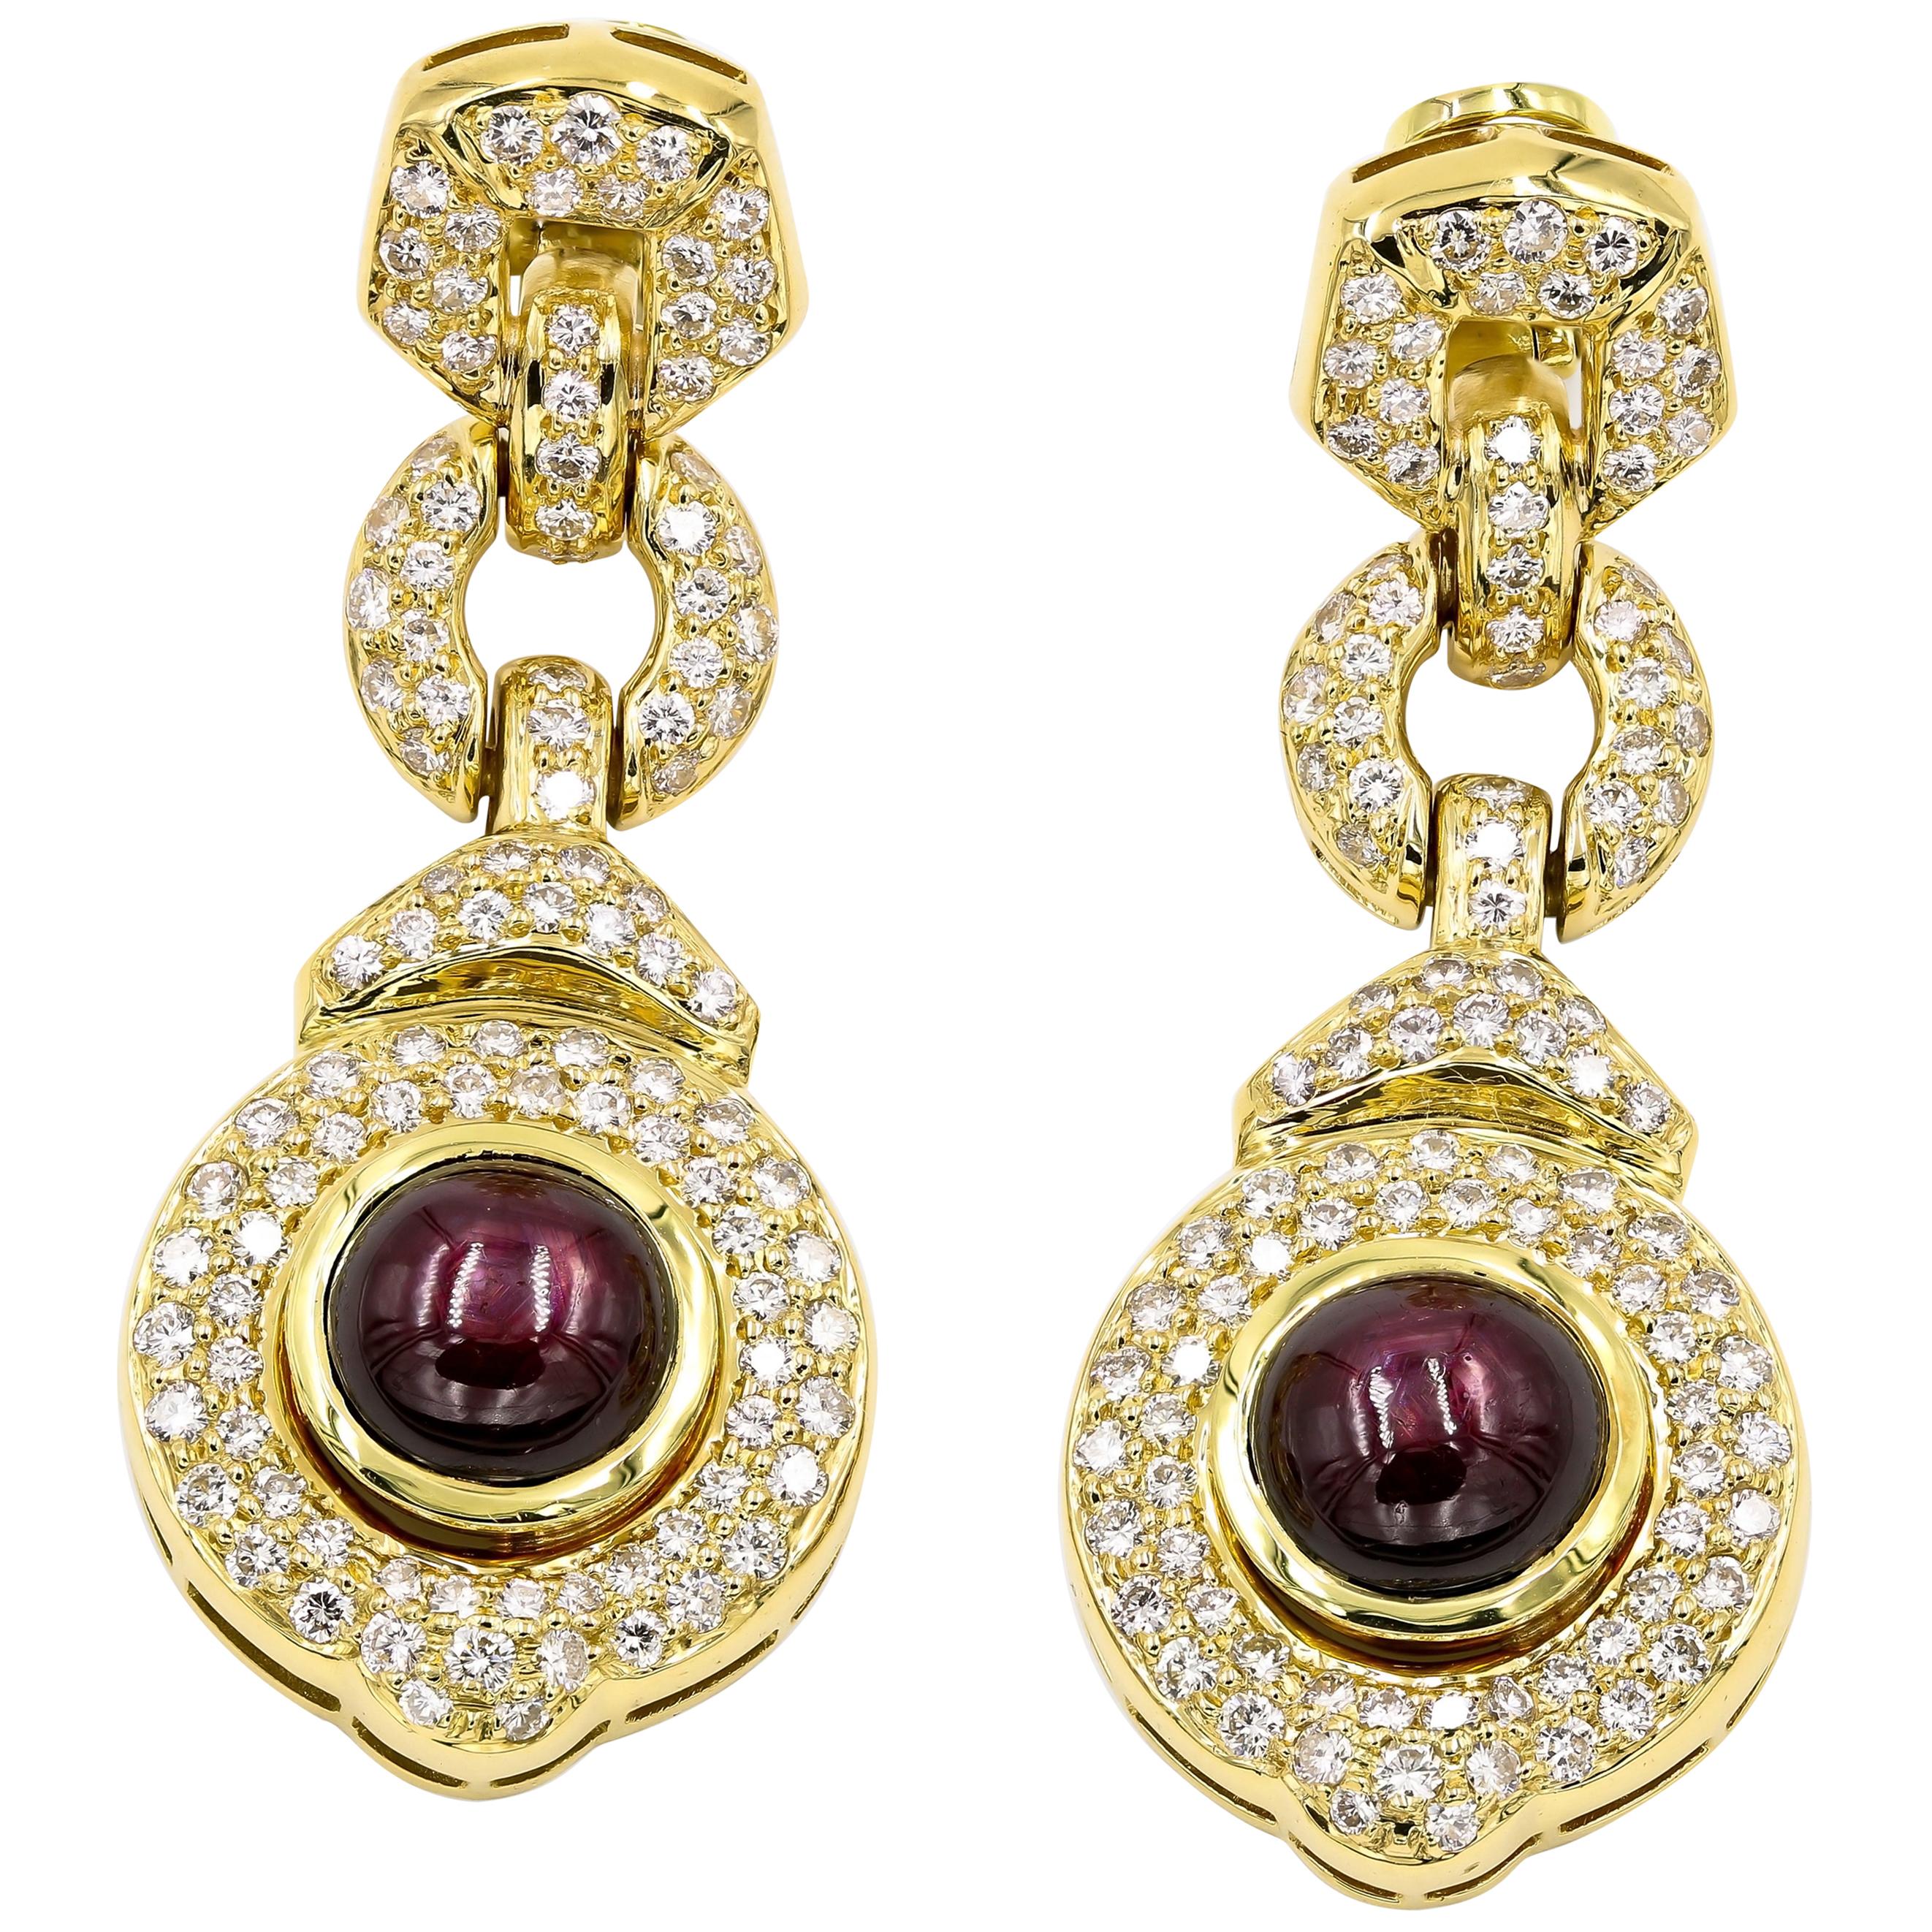 16.97 Carat Cabochon Cut Star Ruby and Diamond Earrings in 18 Karat Yellow Gold For Sale